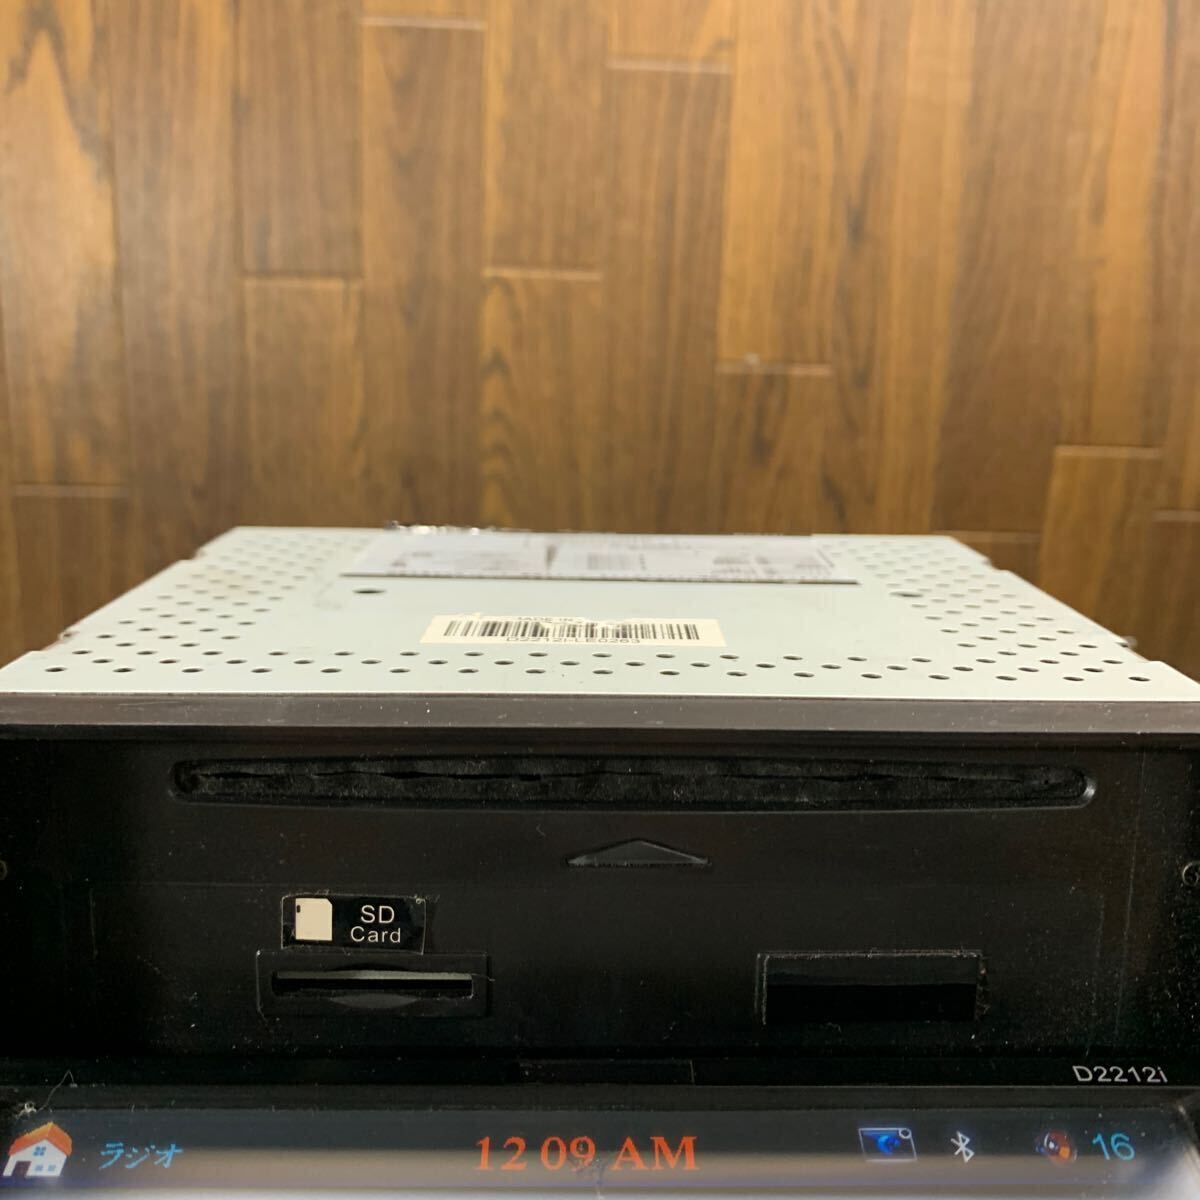 AV4-493 super-discount car stereo DVD player Milion D2212i D2212I-LE0263 CD DVD Bluetooth body only simple operation verification ending used present condition goods 